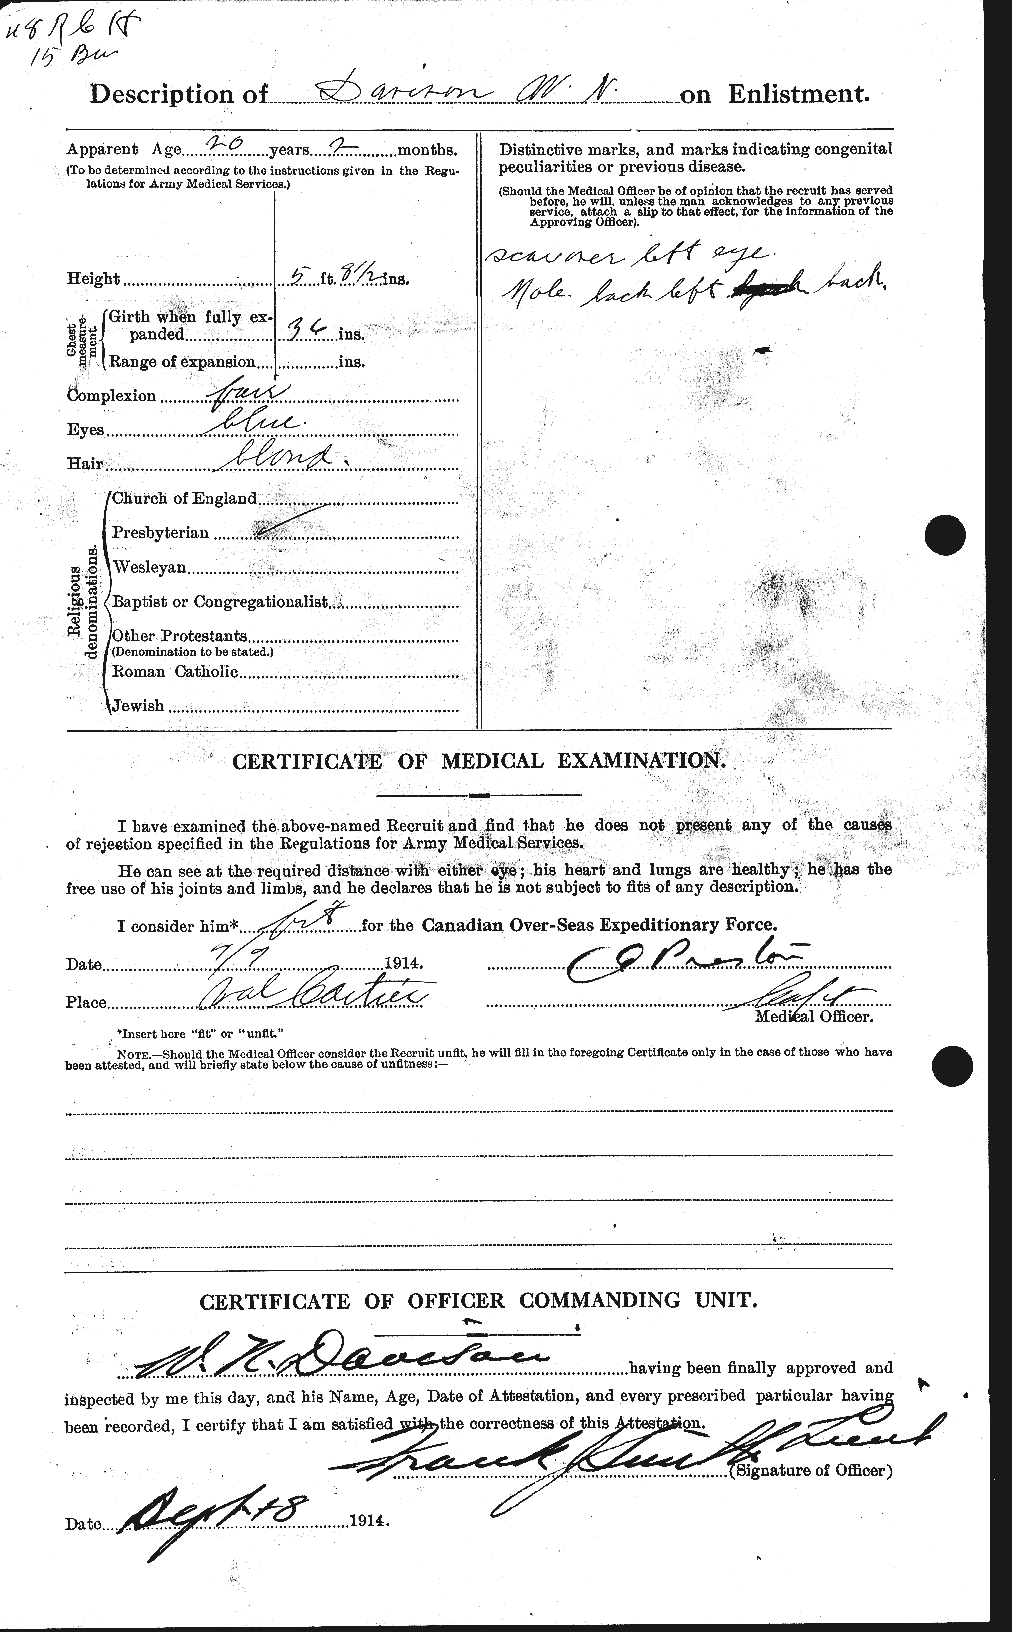 Personnel Records of the First World War - CEF 282510b